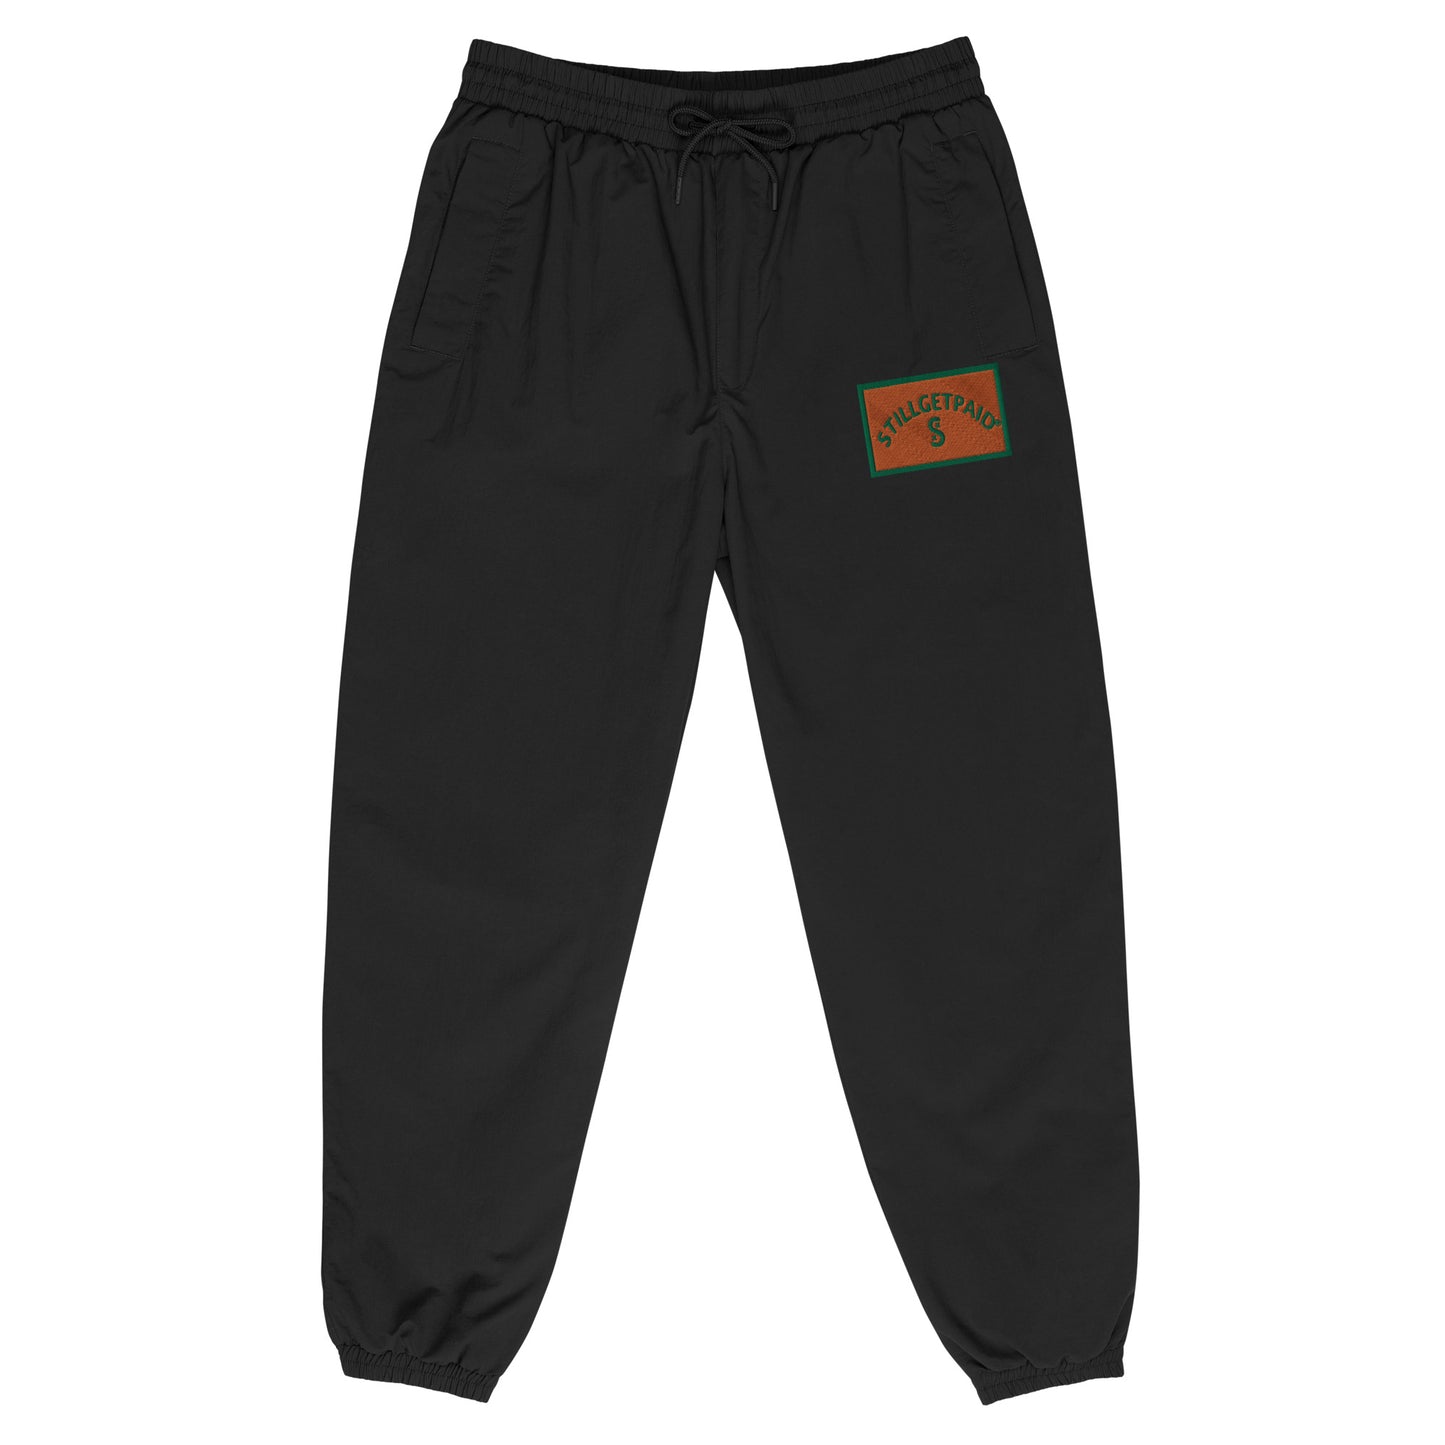 STILLGETPAID® APPAREL tracksuit trousers